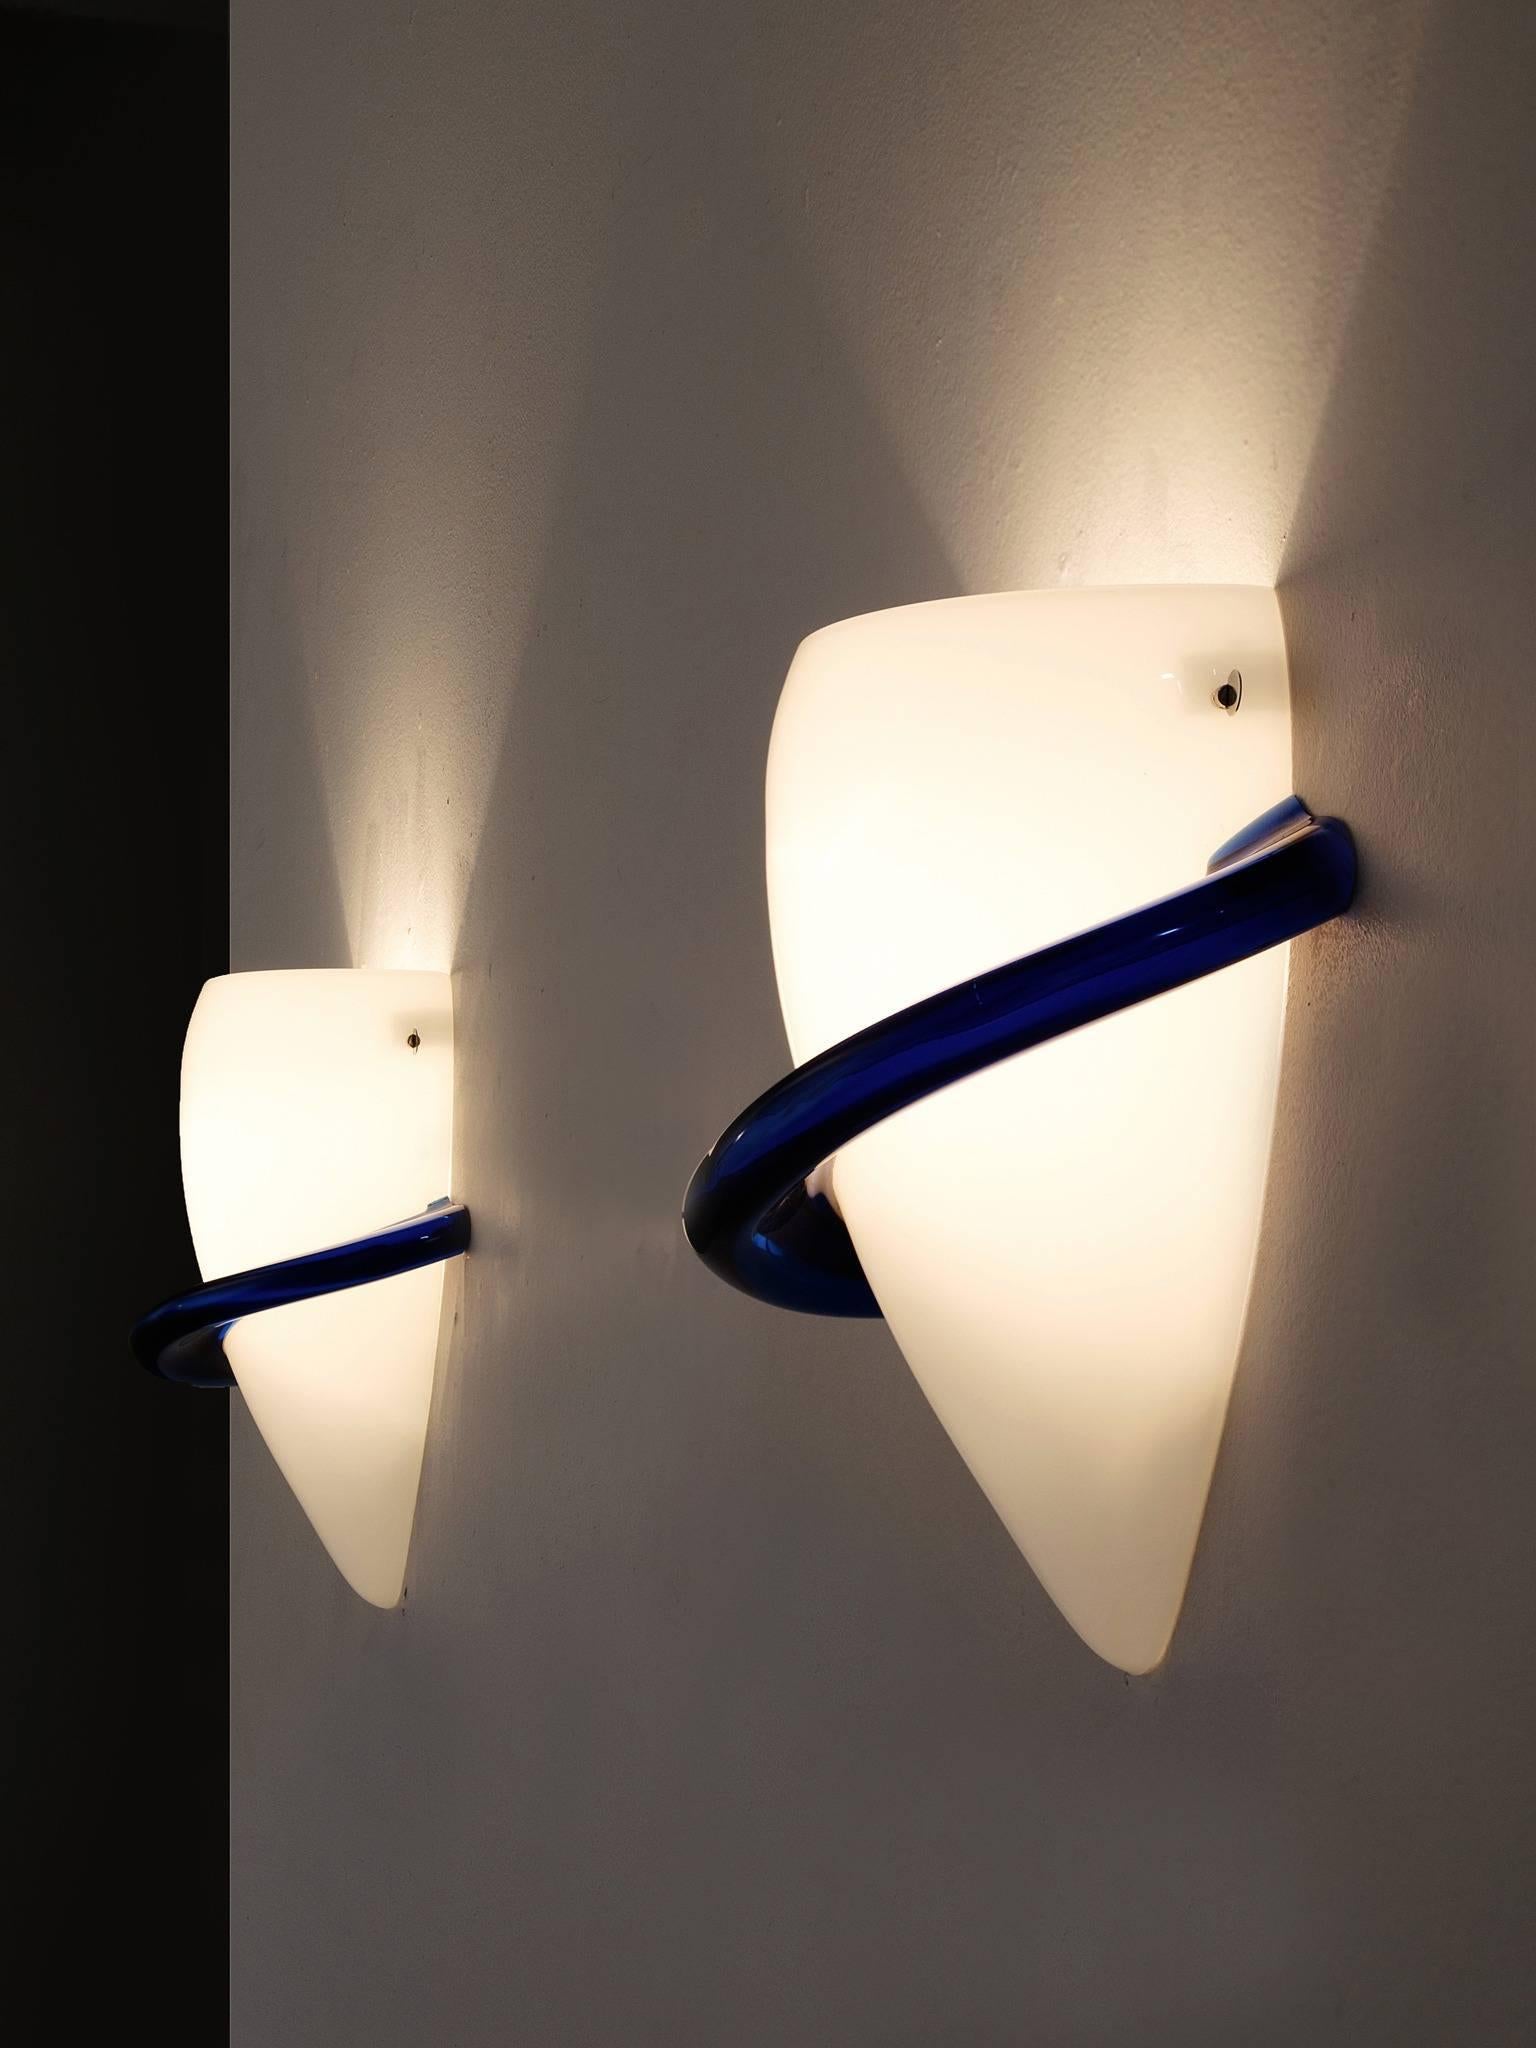 Pair of sconces, in glass, by Tina Marie Aufiero for Venini, Italy 1985.

Elegant pair of wall-lights in white and blue colored glass by the Italian manufacturer Venini. These lights show soft and curved forms, which gives them their elegance. The